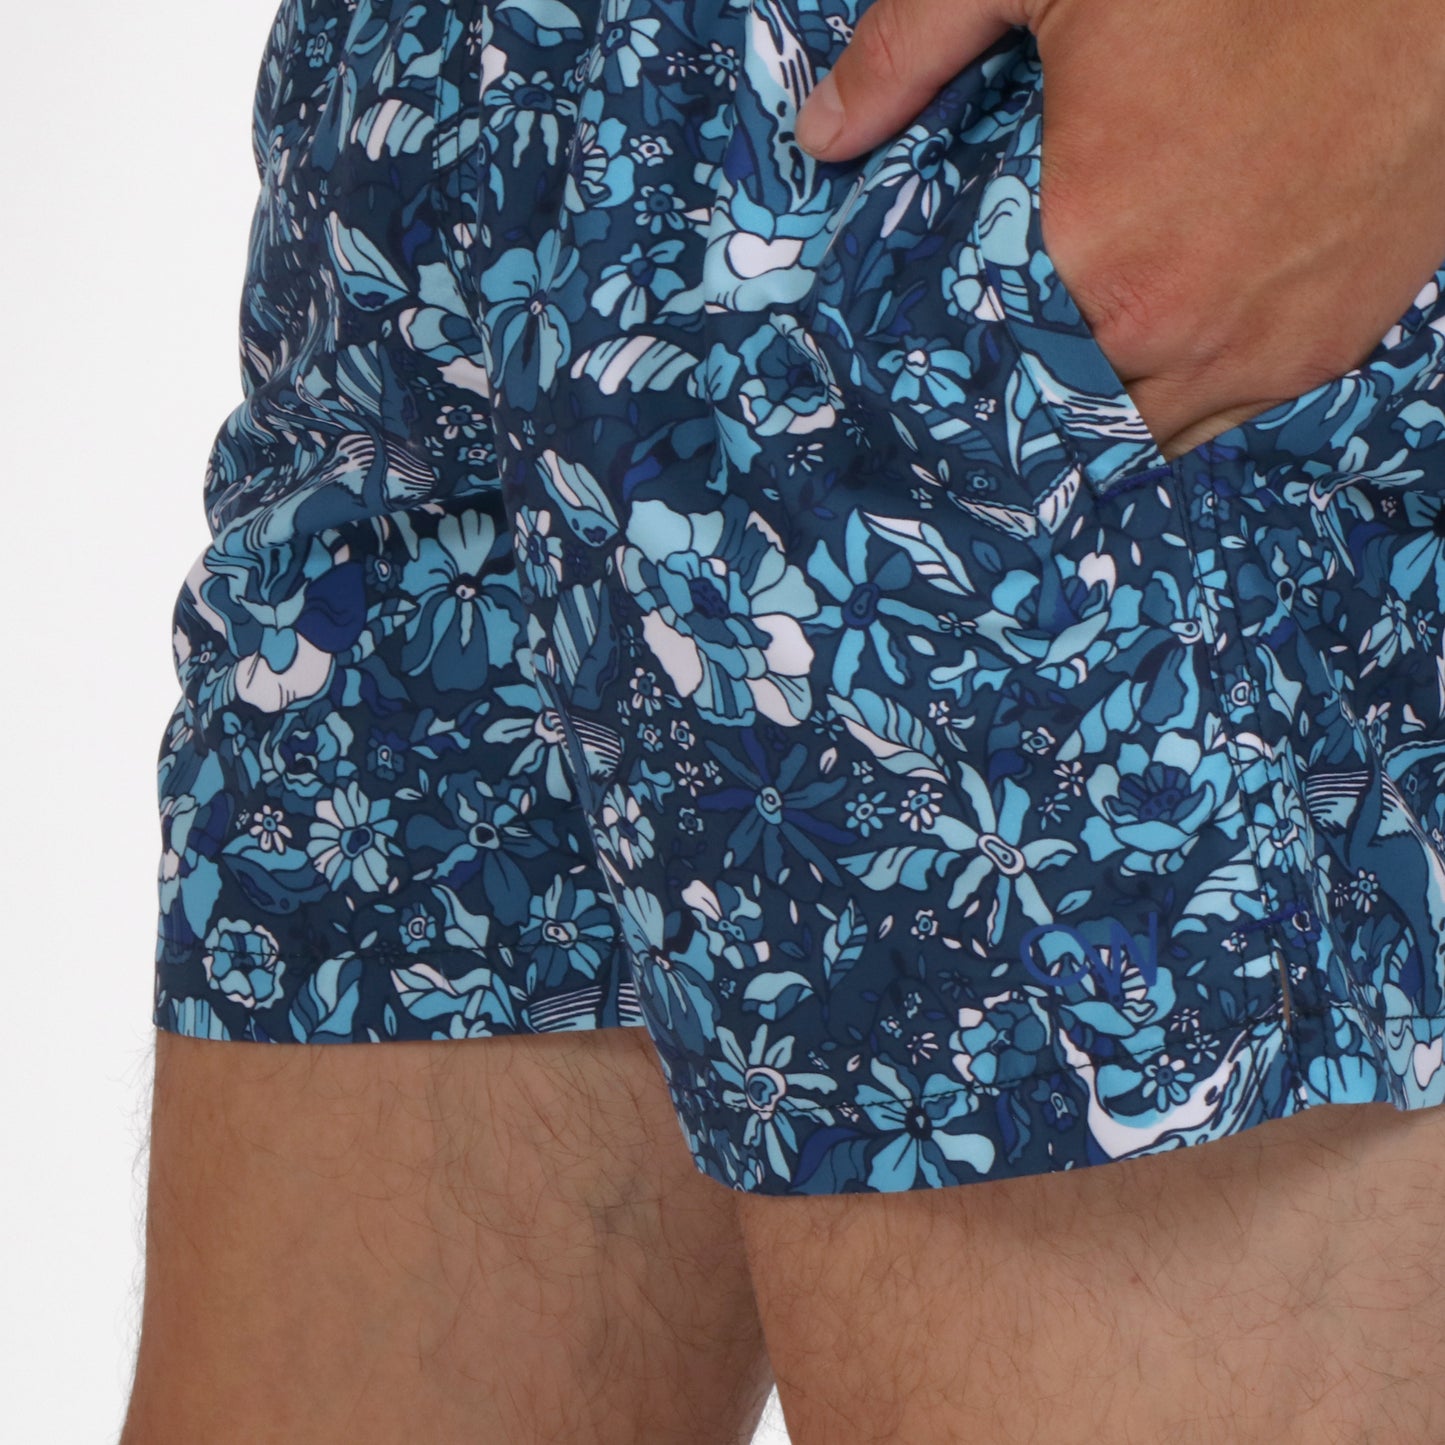 OWSS2206 WHALE OF A FLORAL PRINT MEN'S RECYCLED POLYESTER SWIM SHORT ON BODY OW LOGO DETAIL